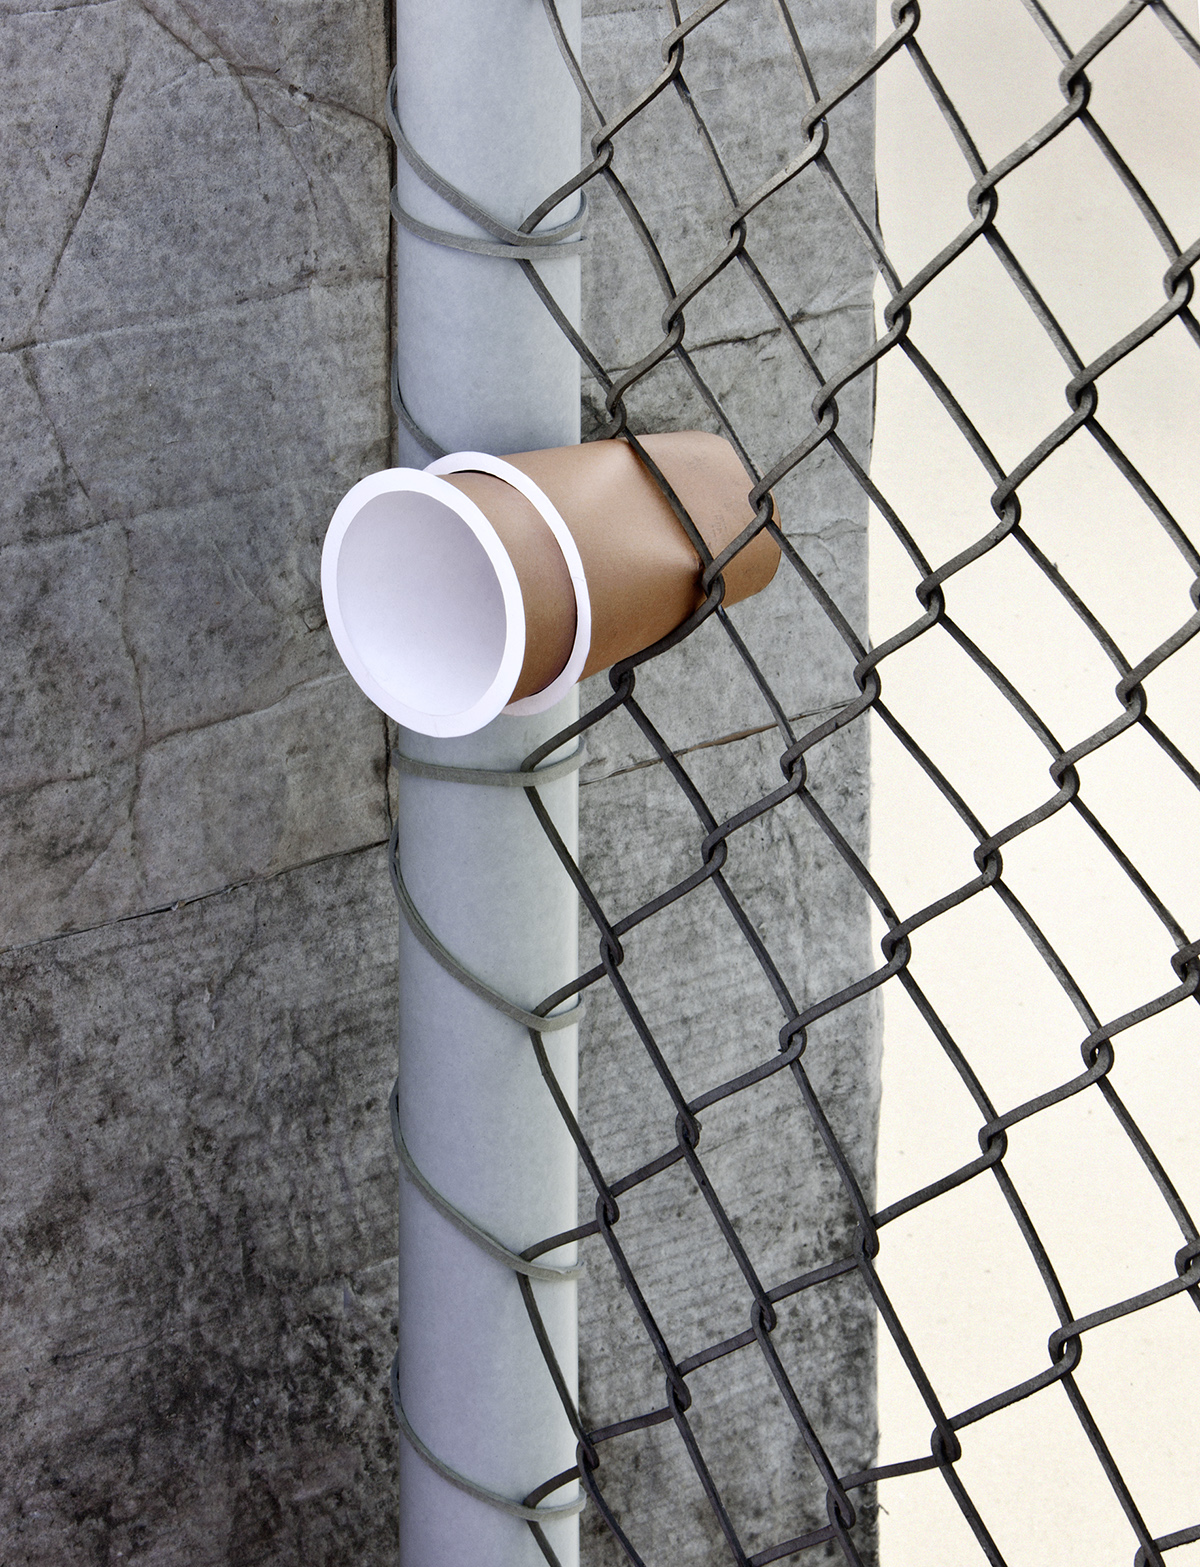 Coffee cup wedged in a wire fence